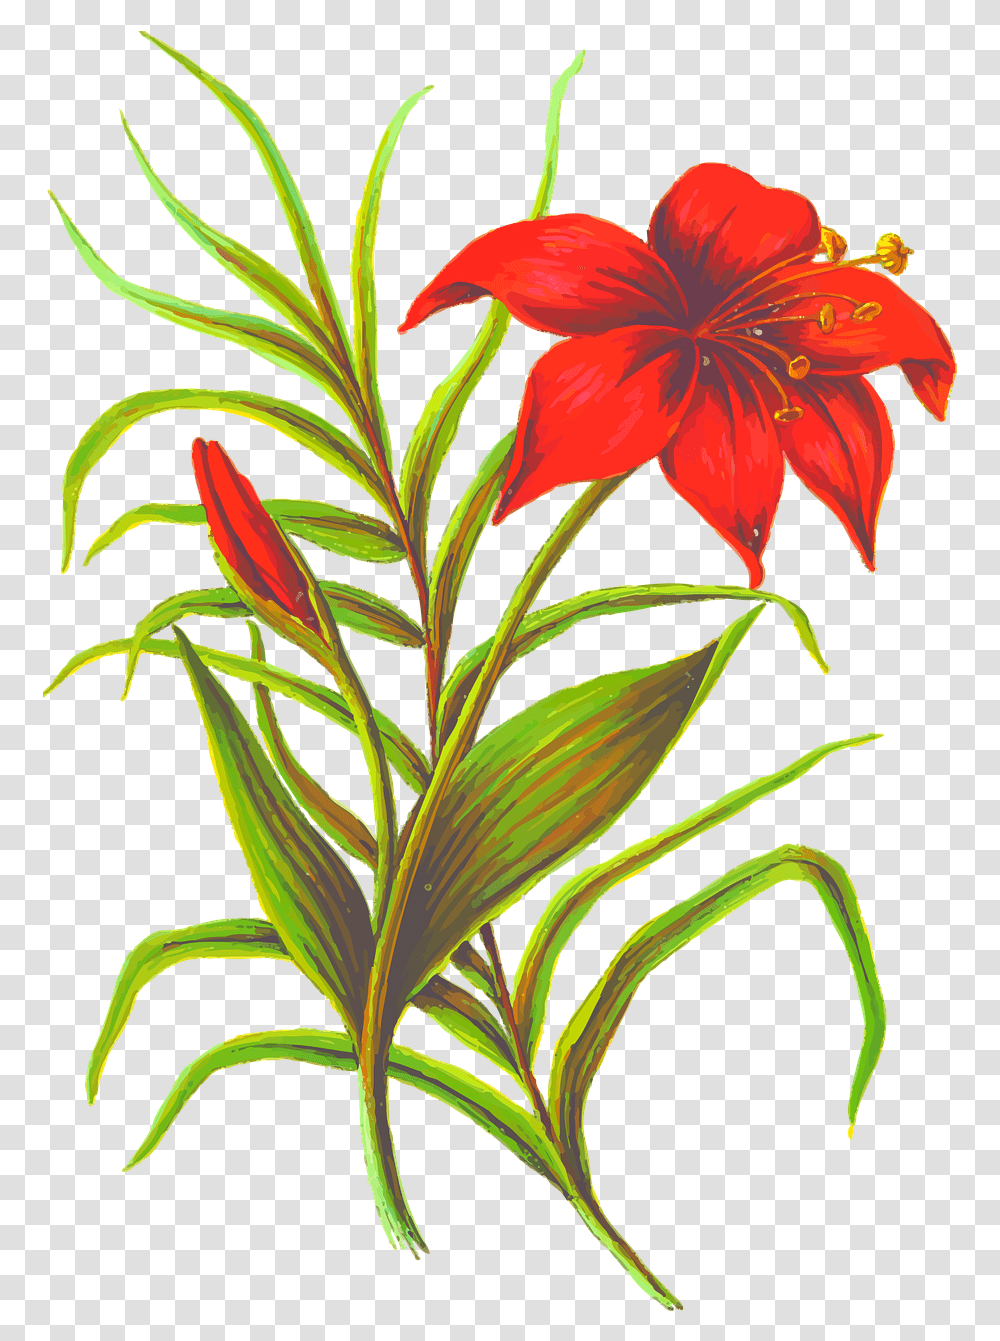 The Best Drawings Of Wild Flowers 23 Ideas Howtodraw In Flower Leaf, Plant, Blossom, Amaryllis, Lily Transparent Png